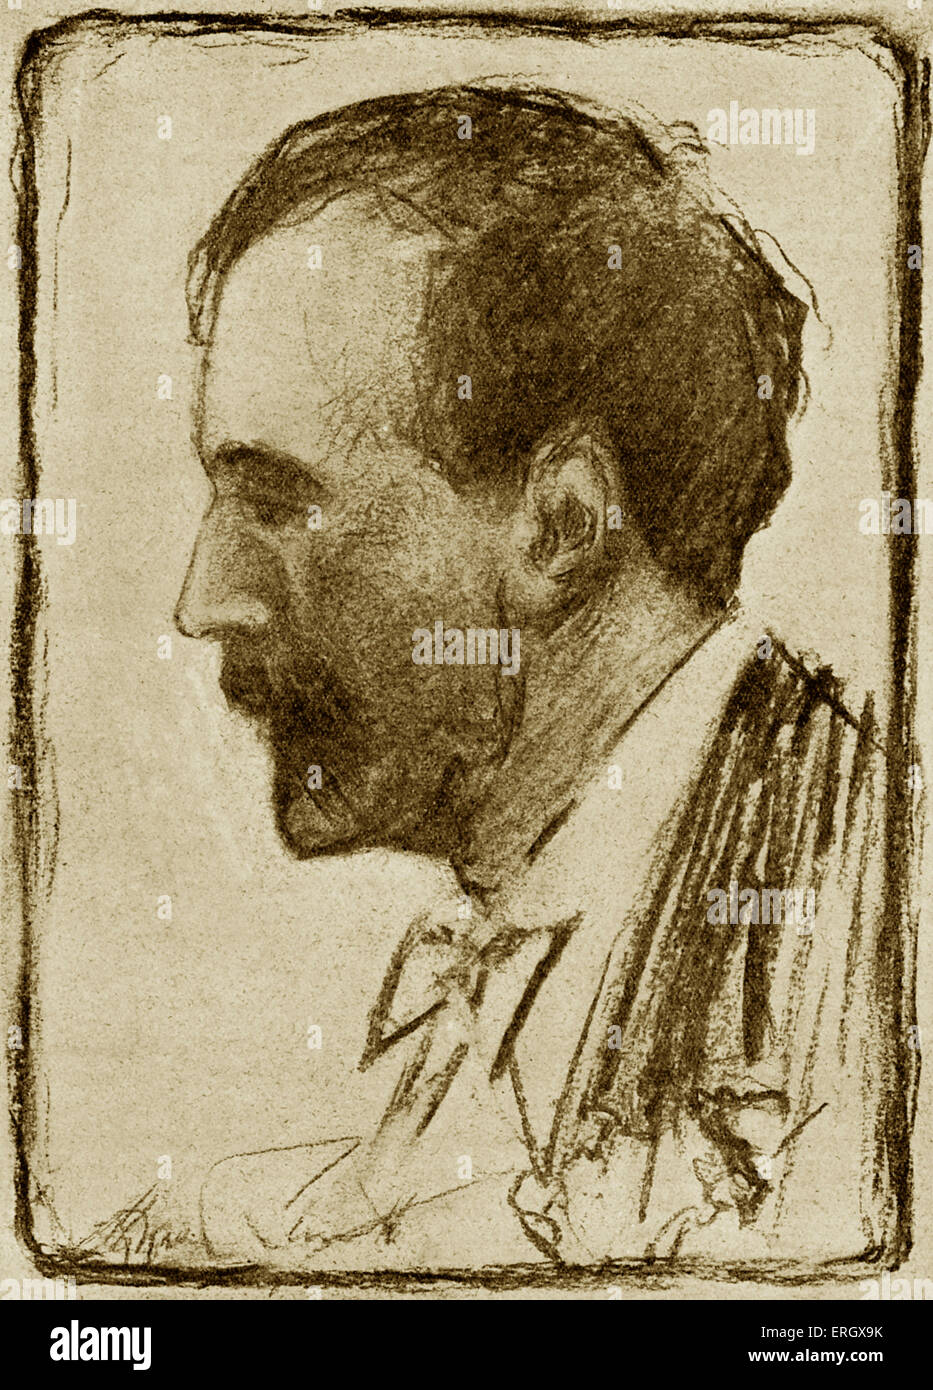 Henry Wood: English conductor, 3 March 1869 - 19 August 1944. Illustration by Howard Smith. Stock Photo